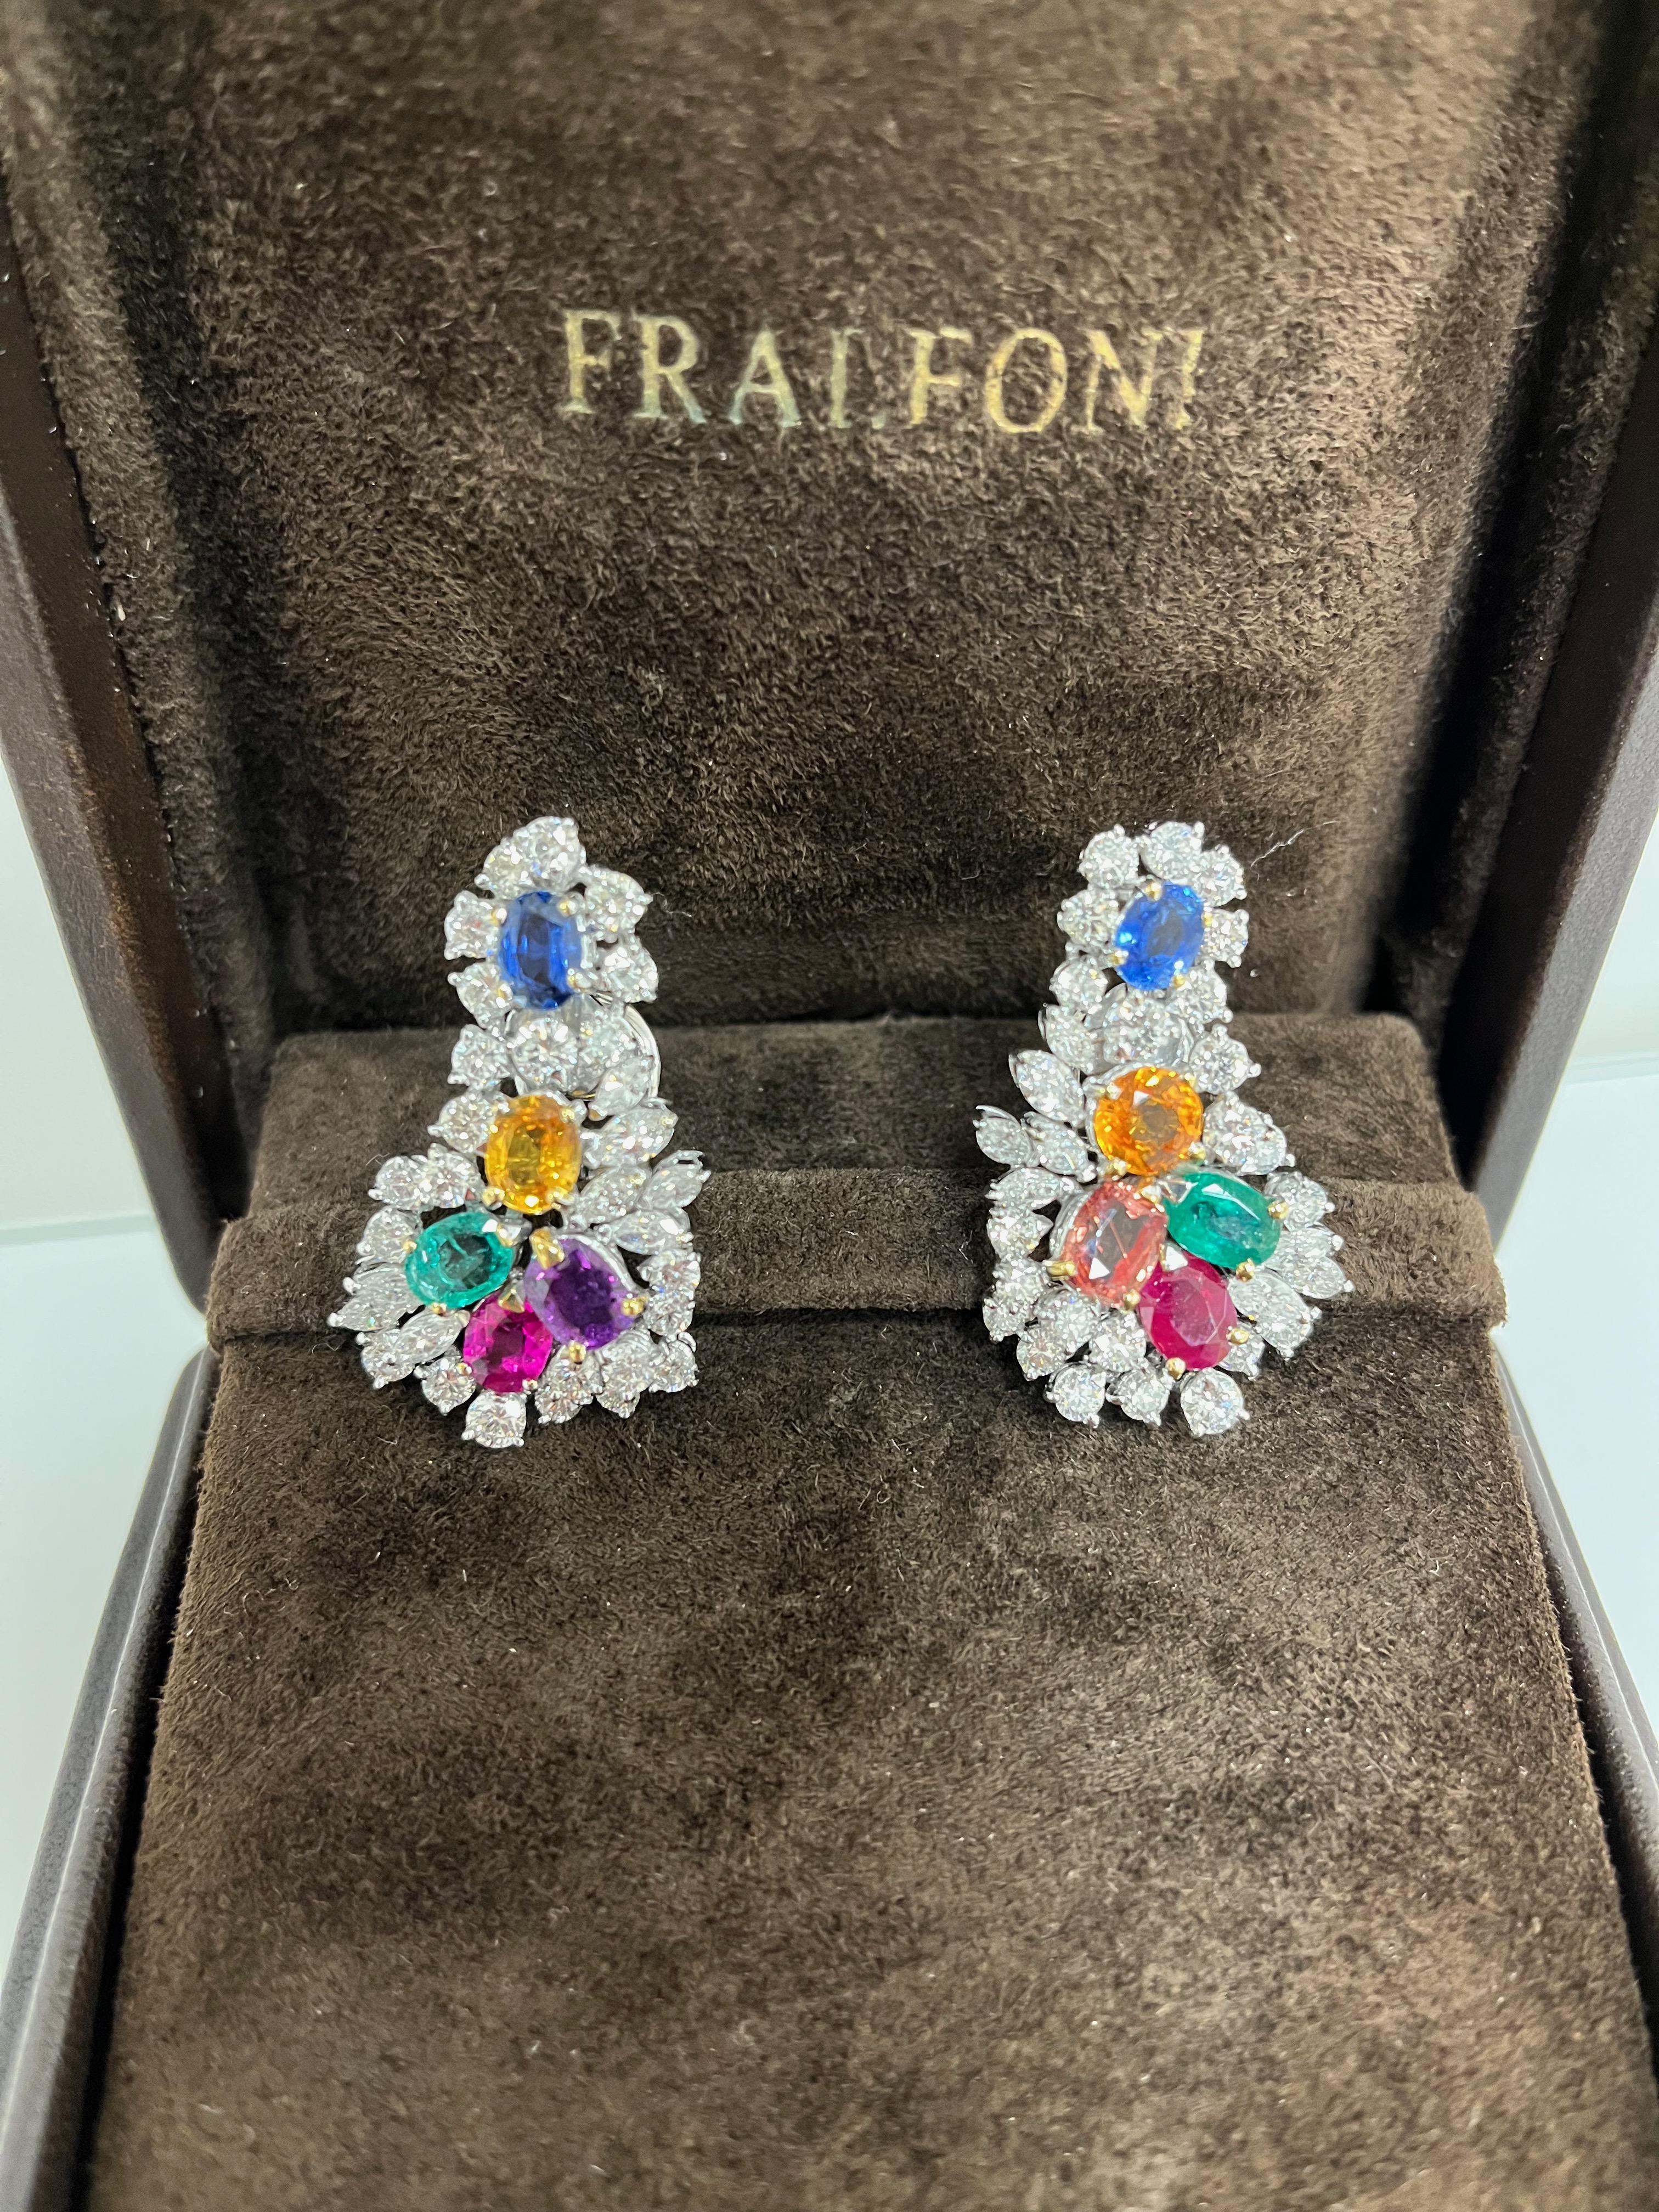 Pair of 1980 Tutti Frutti clip earrings realized in 18 kt. white gold with 5.19 carats of round cut diamonds, 1.83 carats of navette diamonds and 9.73 carats of emeralds, rubies and sapphires.
Each earring has pin and clip.
One of a kind